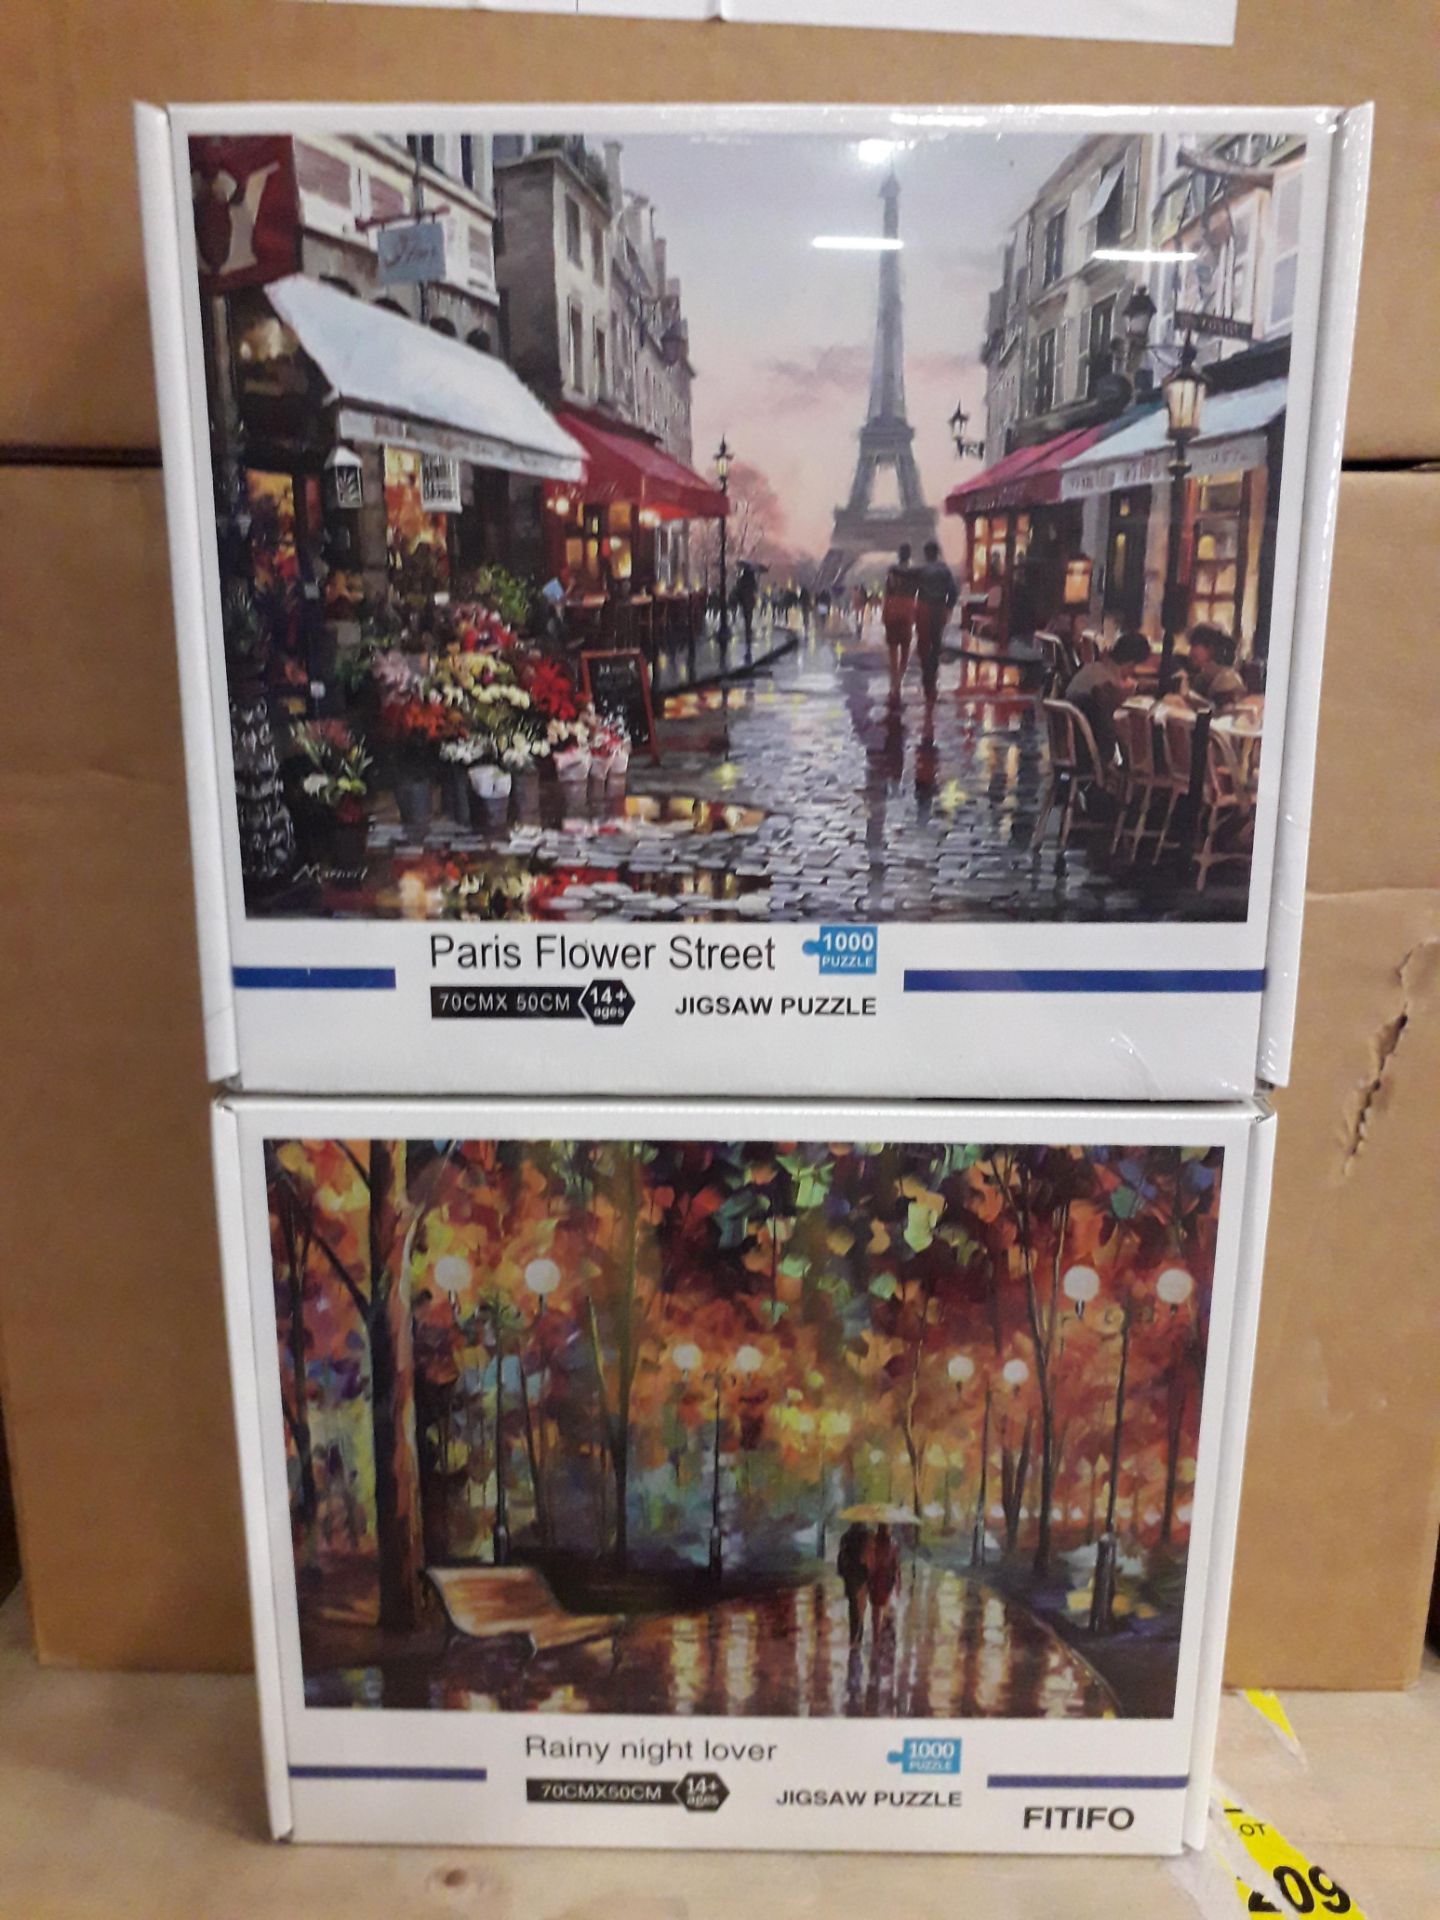 128 X BRAND NEW MIXED JIGSAW LOT TO INCLUDE RAINY NIGHT LOVER AND PARIS FLOWER STREET 70 CM X 50